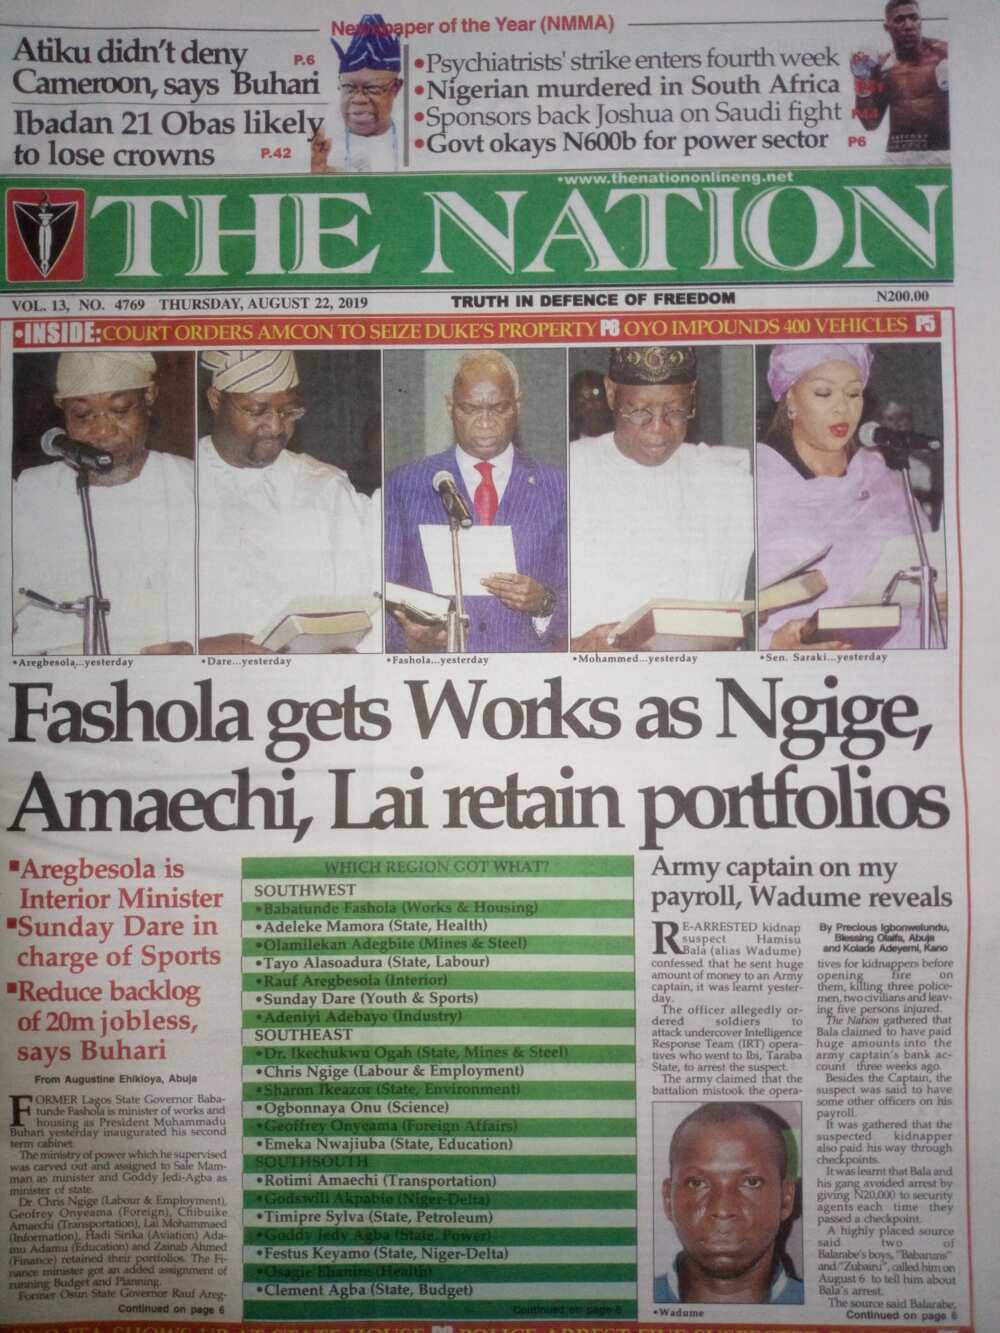 The Nation newspaper review of August 22